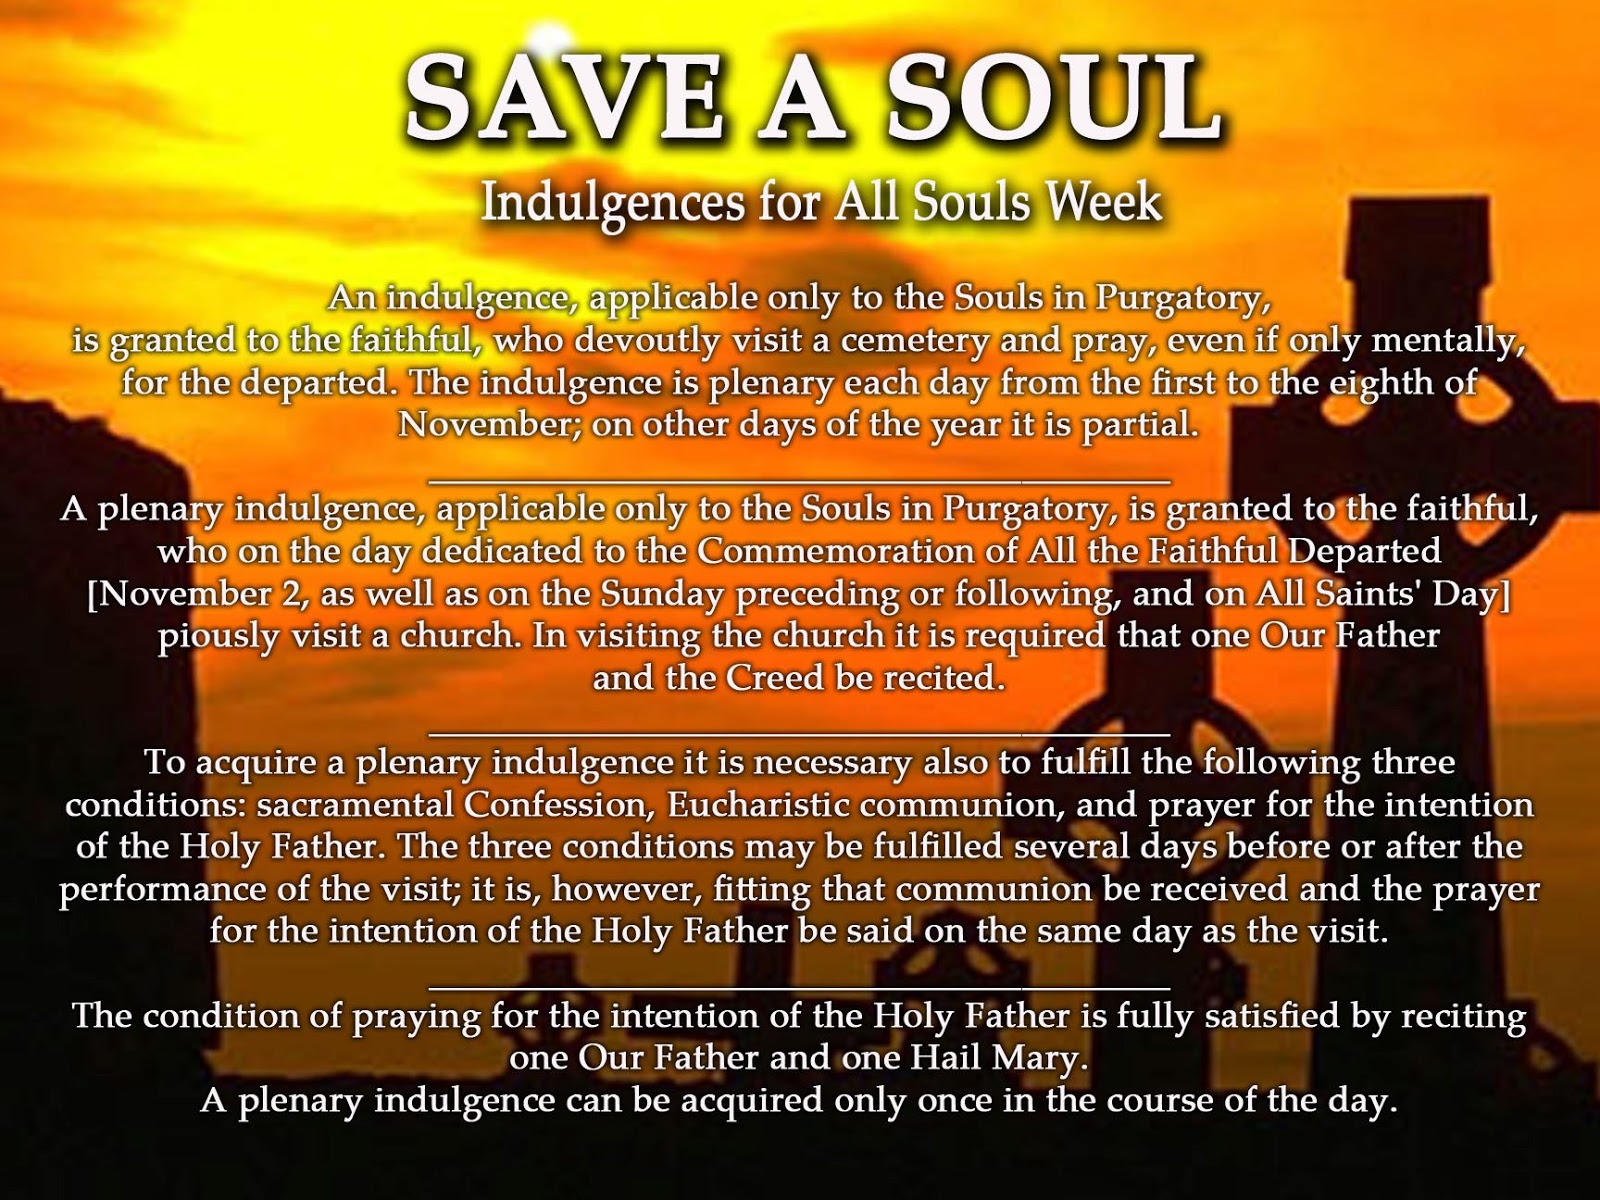 NATIONAL SHRINE OF THE SACRED HEART SAVE A SOUL INDULGENCES FOR ALL